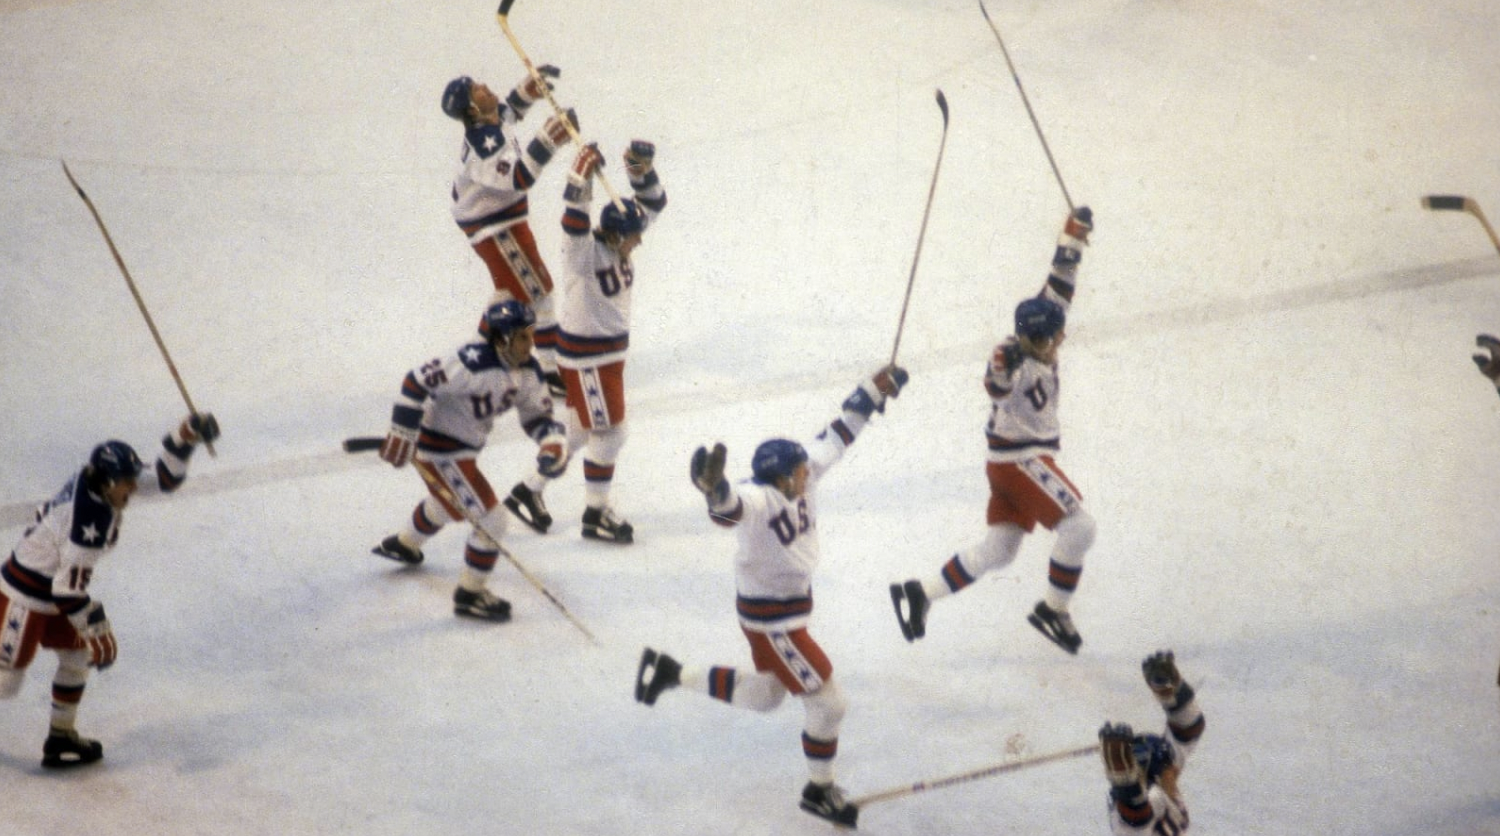 The "Miracle on Ice" took place in 198o at the Winter Olympics in Lake Placid. Representing an extension of the Cold War, the United States beat the top ranked professional Russian team with a group of mostly college players. 